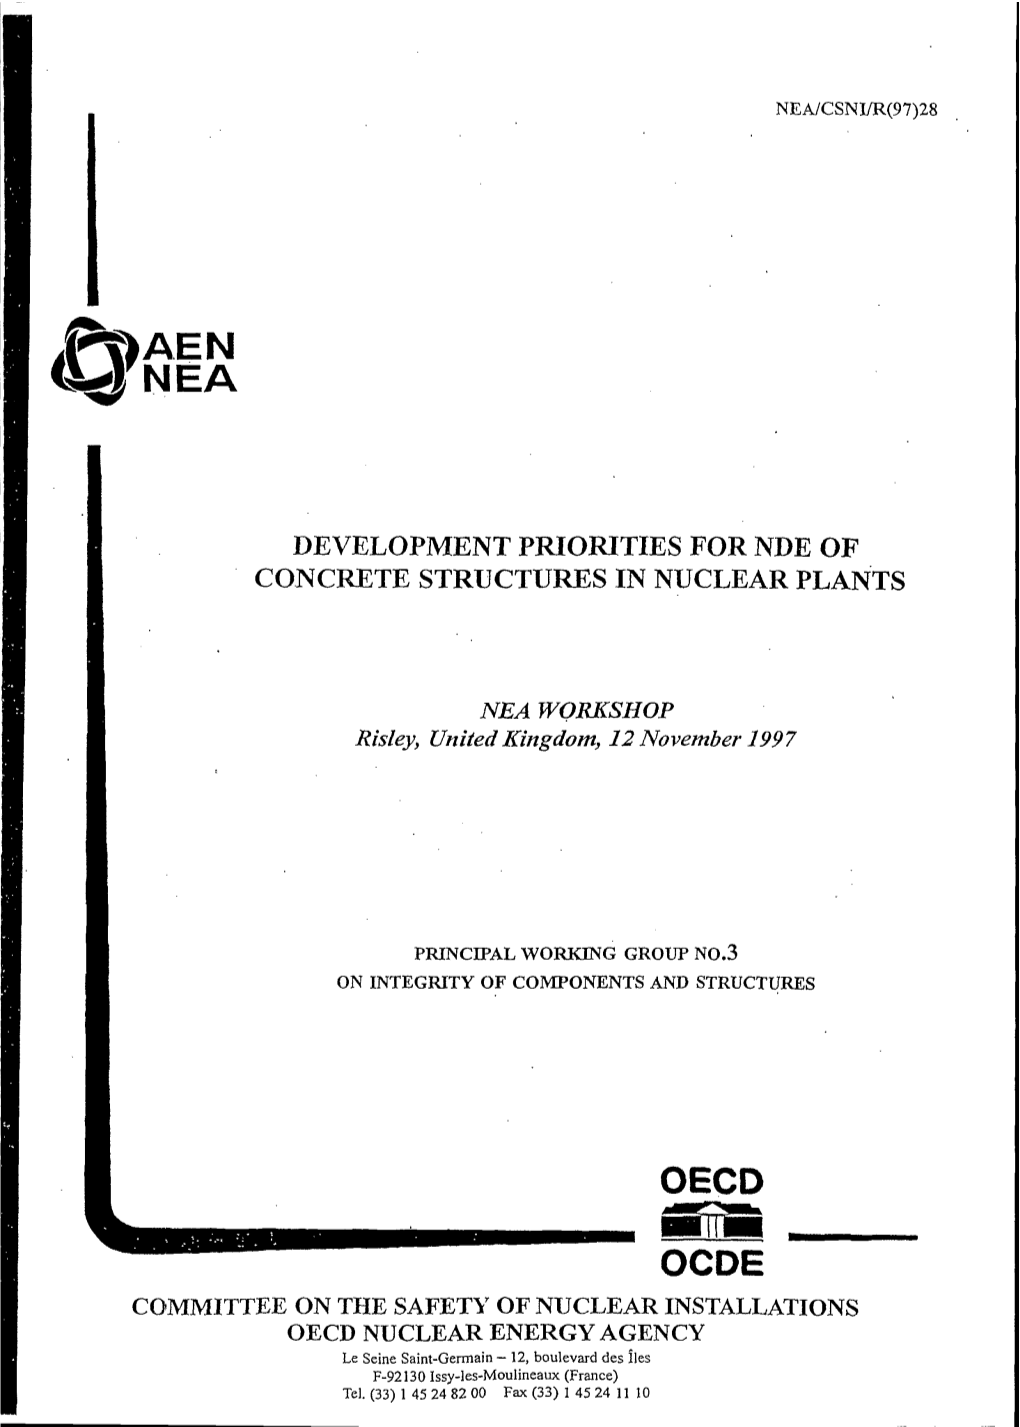 Development Priorities for Nde of Concrete Structures in Nuclear Plants